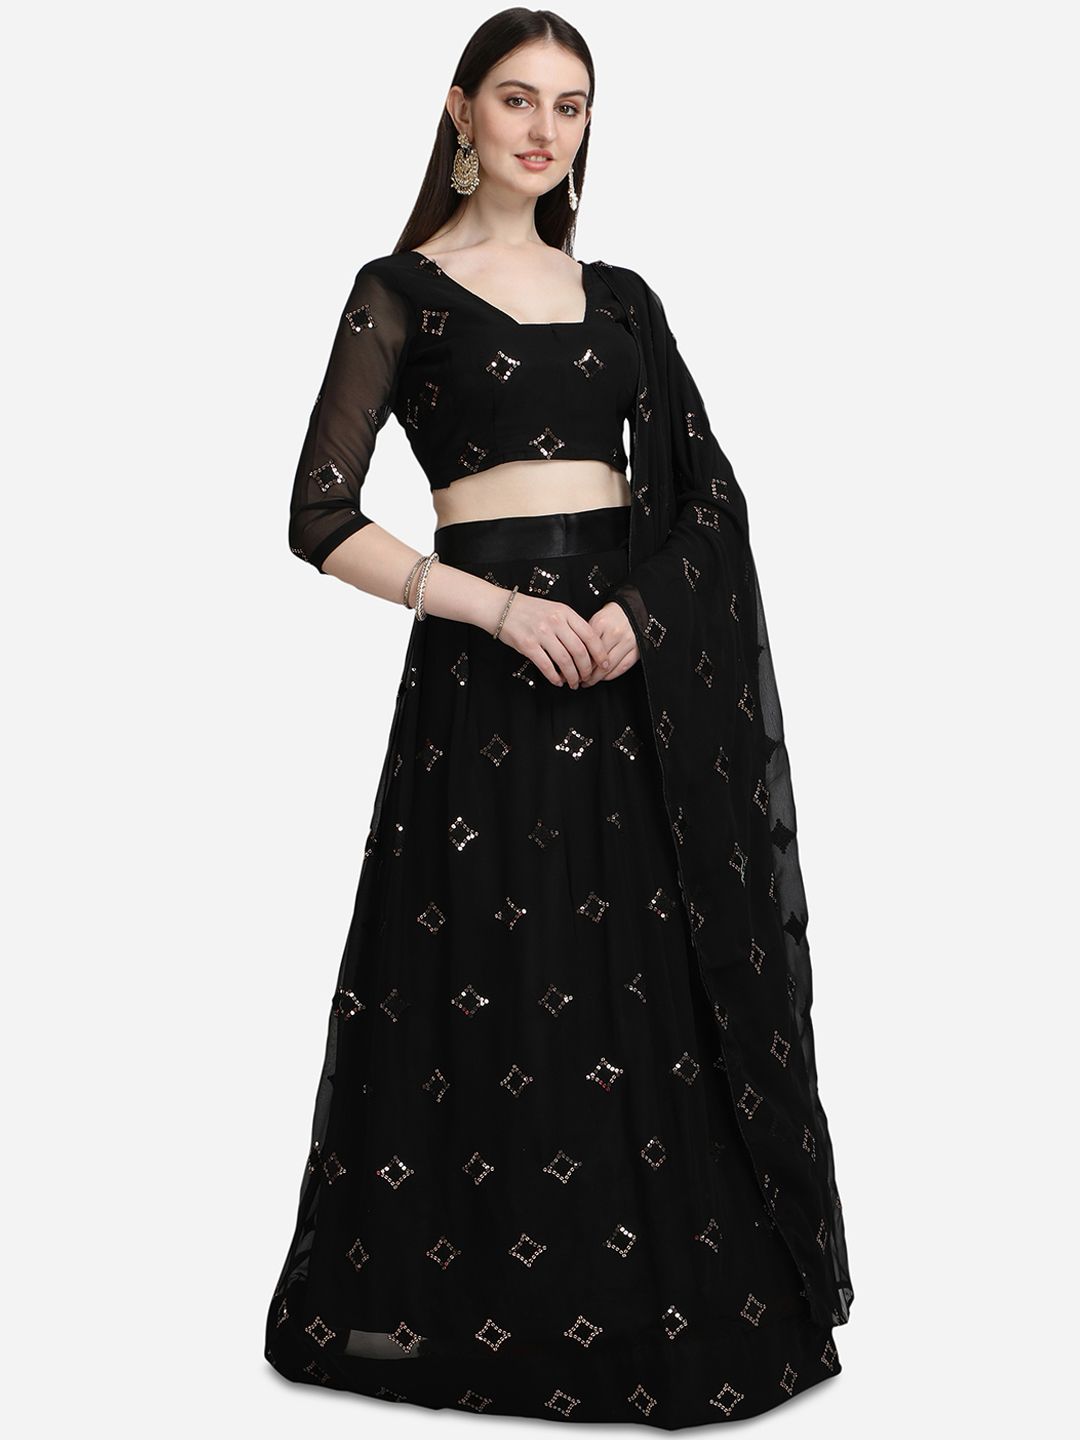 Pratham Blue Black Embellished Sequinned Semi-Stitched Lehenga & Unstitched Blouse With Dupatta Price in India